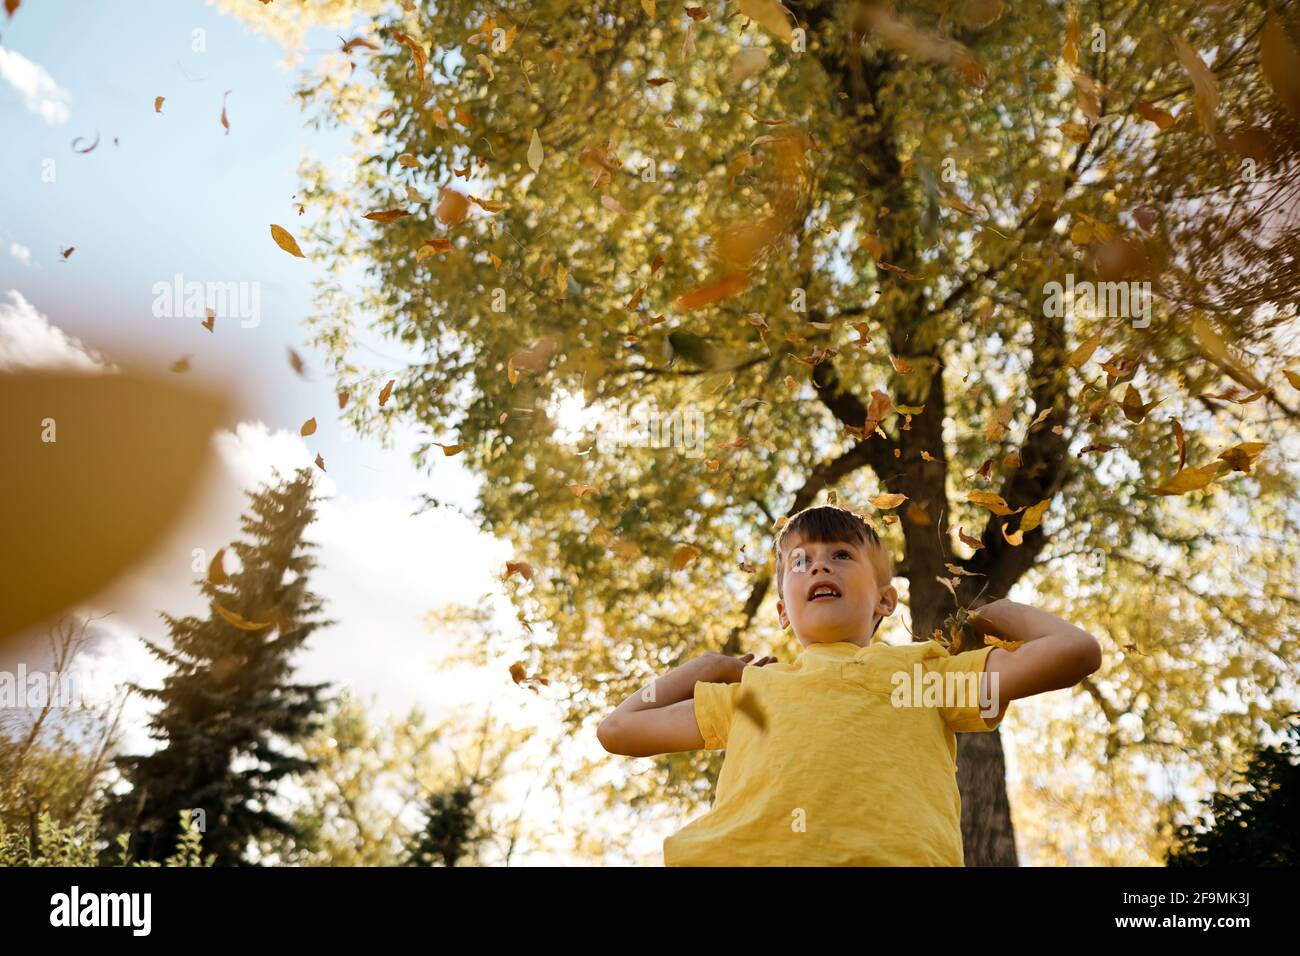 Young boy dressed in yellow playing in leaves in the fall Stock Photo